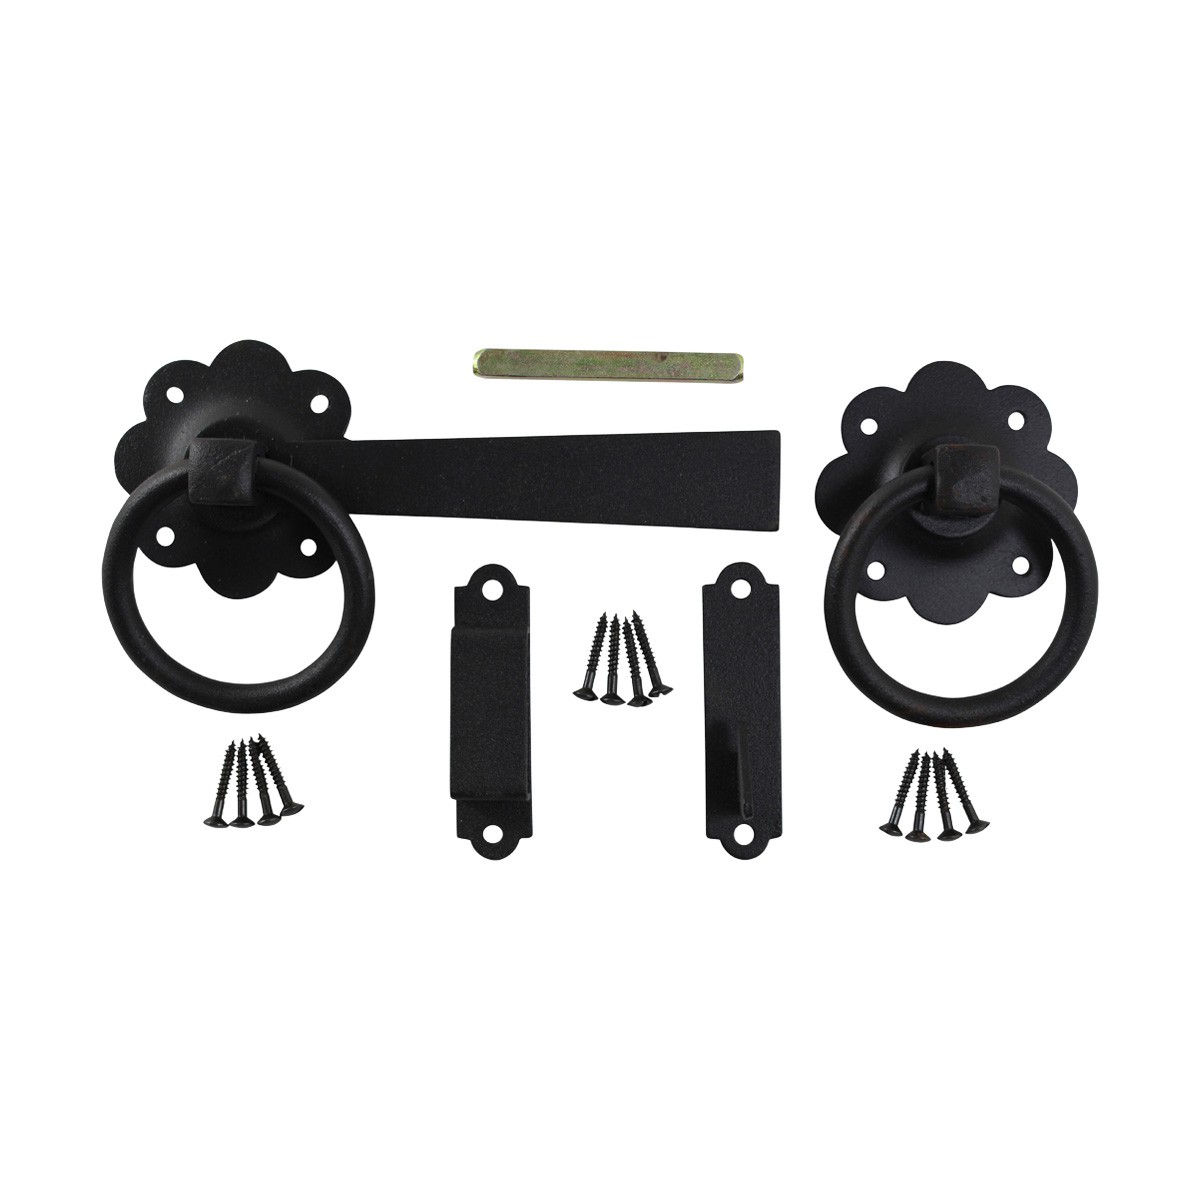 Buy Dale Black JAP'D 152mm Ring Gate Latch (Pre Packed), Door Handles &  Locks Product suppliers UK - Eh Smith